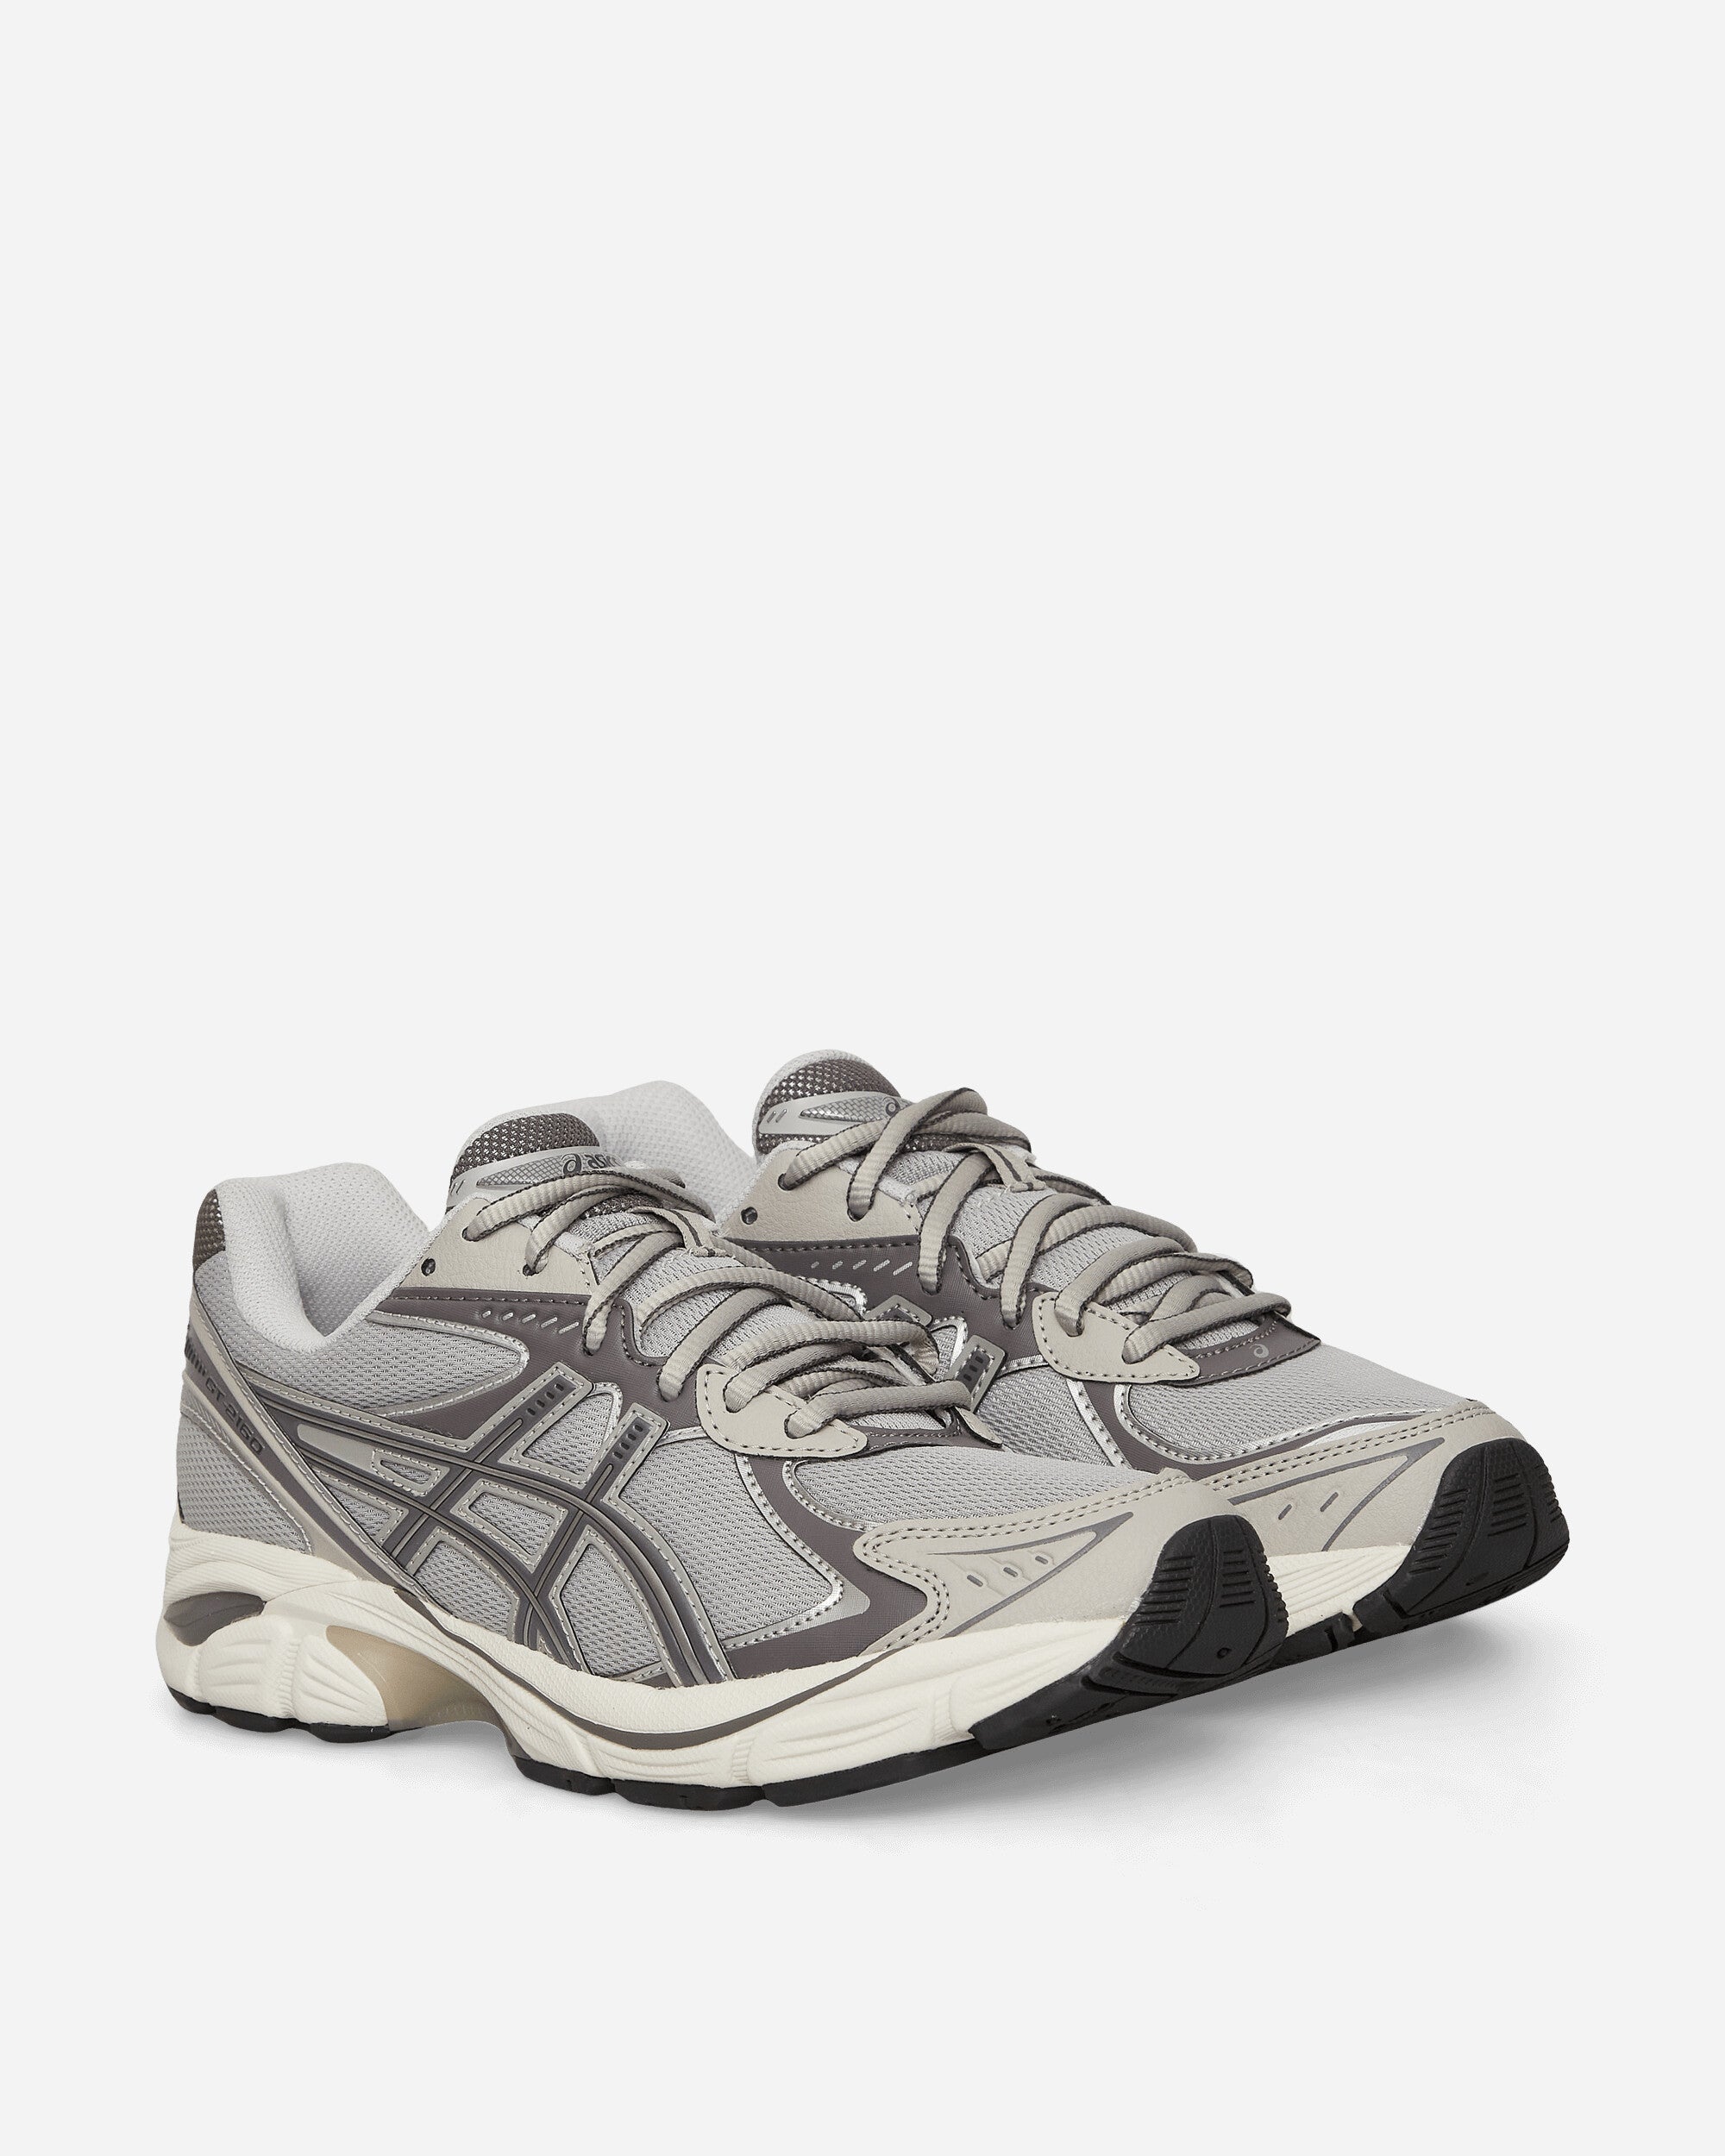 Asics Gt-2160 Oyster Grey/Carbon Sneakers Low 1203A320-020